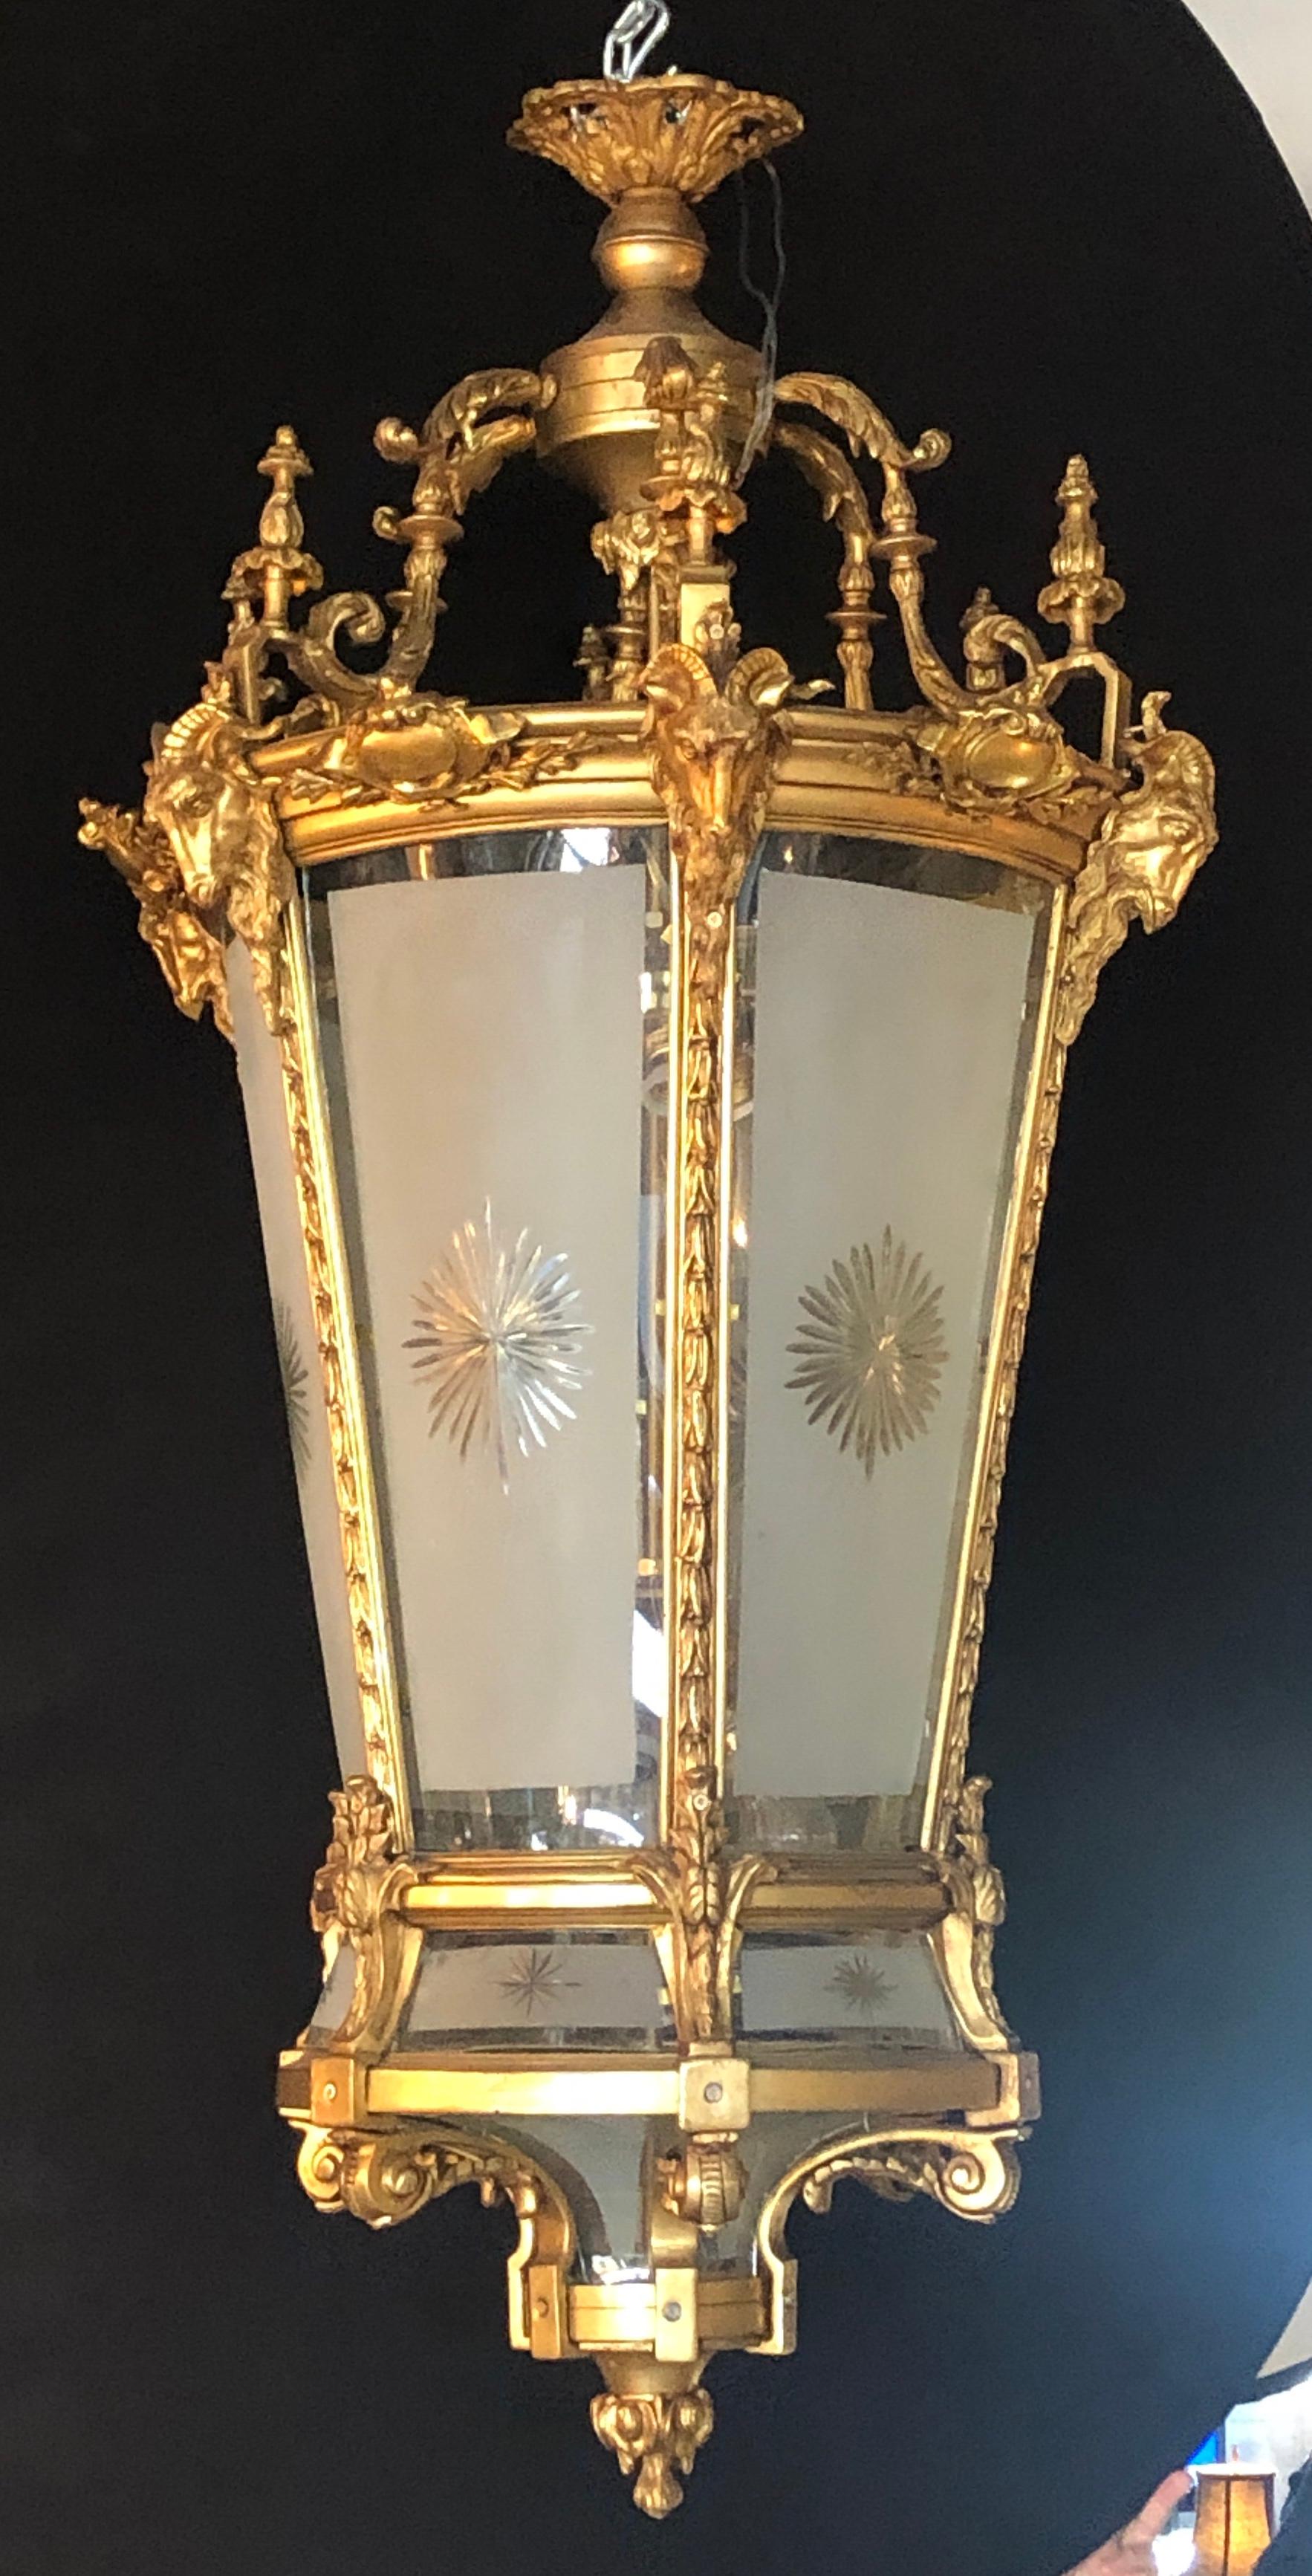 Pair of Louis XVI style monumental doré bronze ram's head etched glass lanterns. These spectacular one of a kind Lanterns are simply too stunning to behold. The frosted and etched star burst curved panels of glass framed in a heavy thick gilt gold